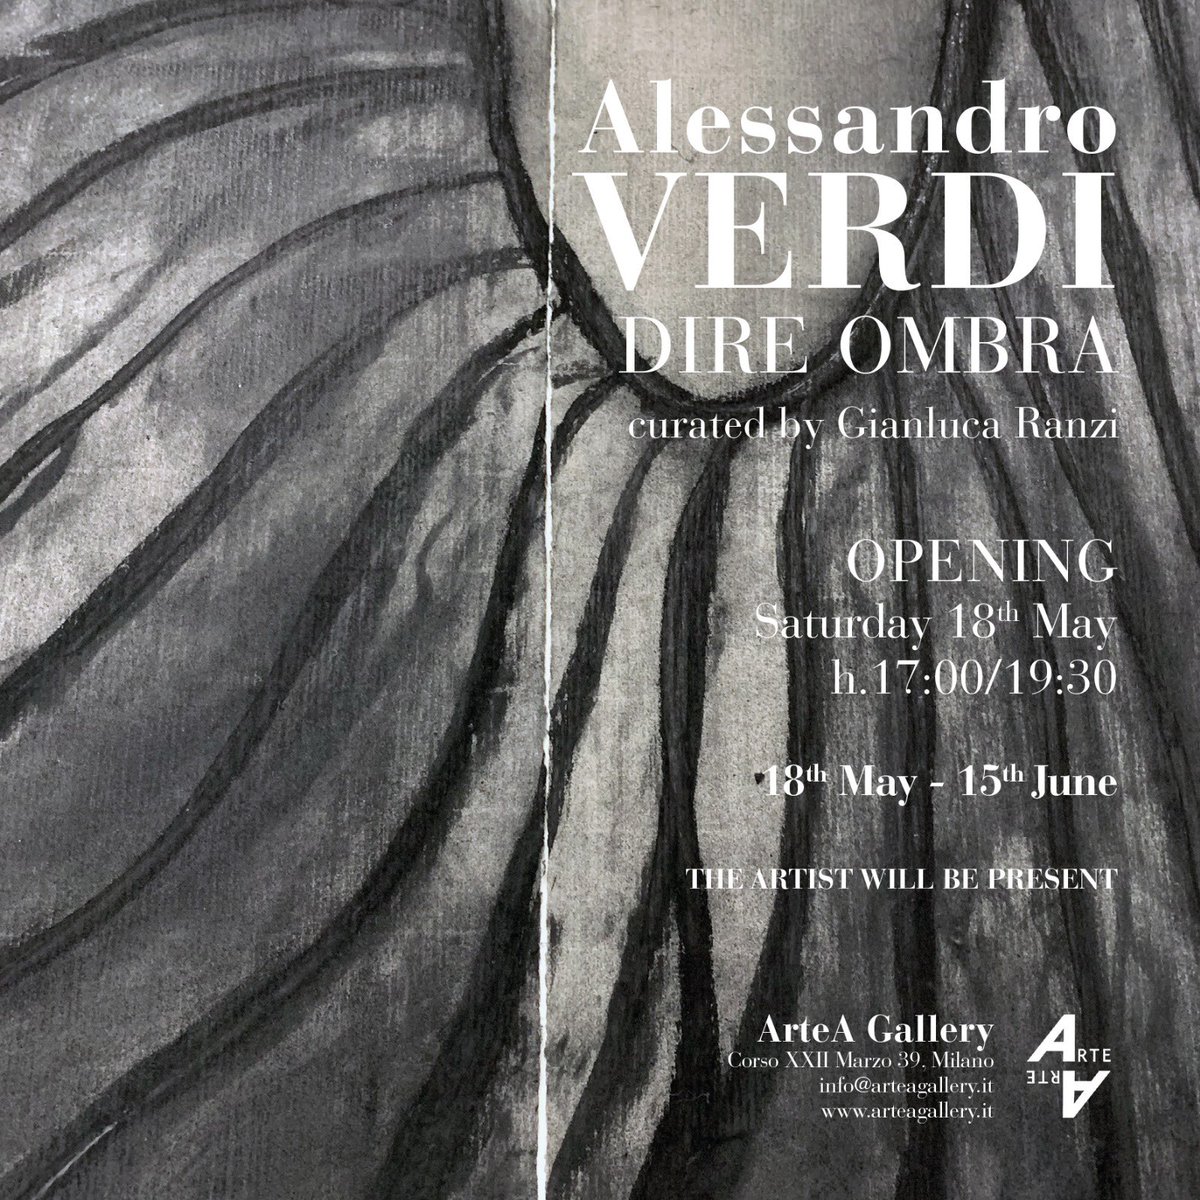 ALESSANDRO VERDI
Dire Ombra
curated by Gianluca Ranzi
Saturday 18th May 
opening at 17pm
The artist will be present 
DO NOT TO BE MISSED!!!
#arteagallerymilano #fondazionemudima #AlessandroVerdi #milanomostre